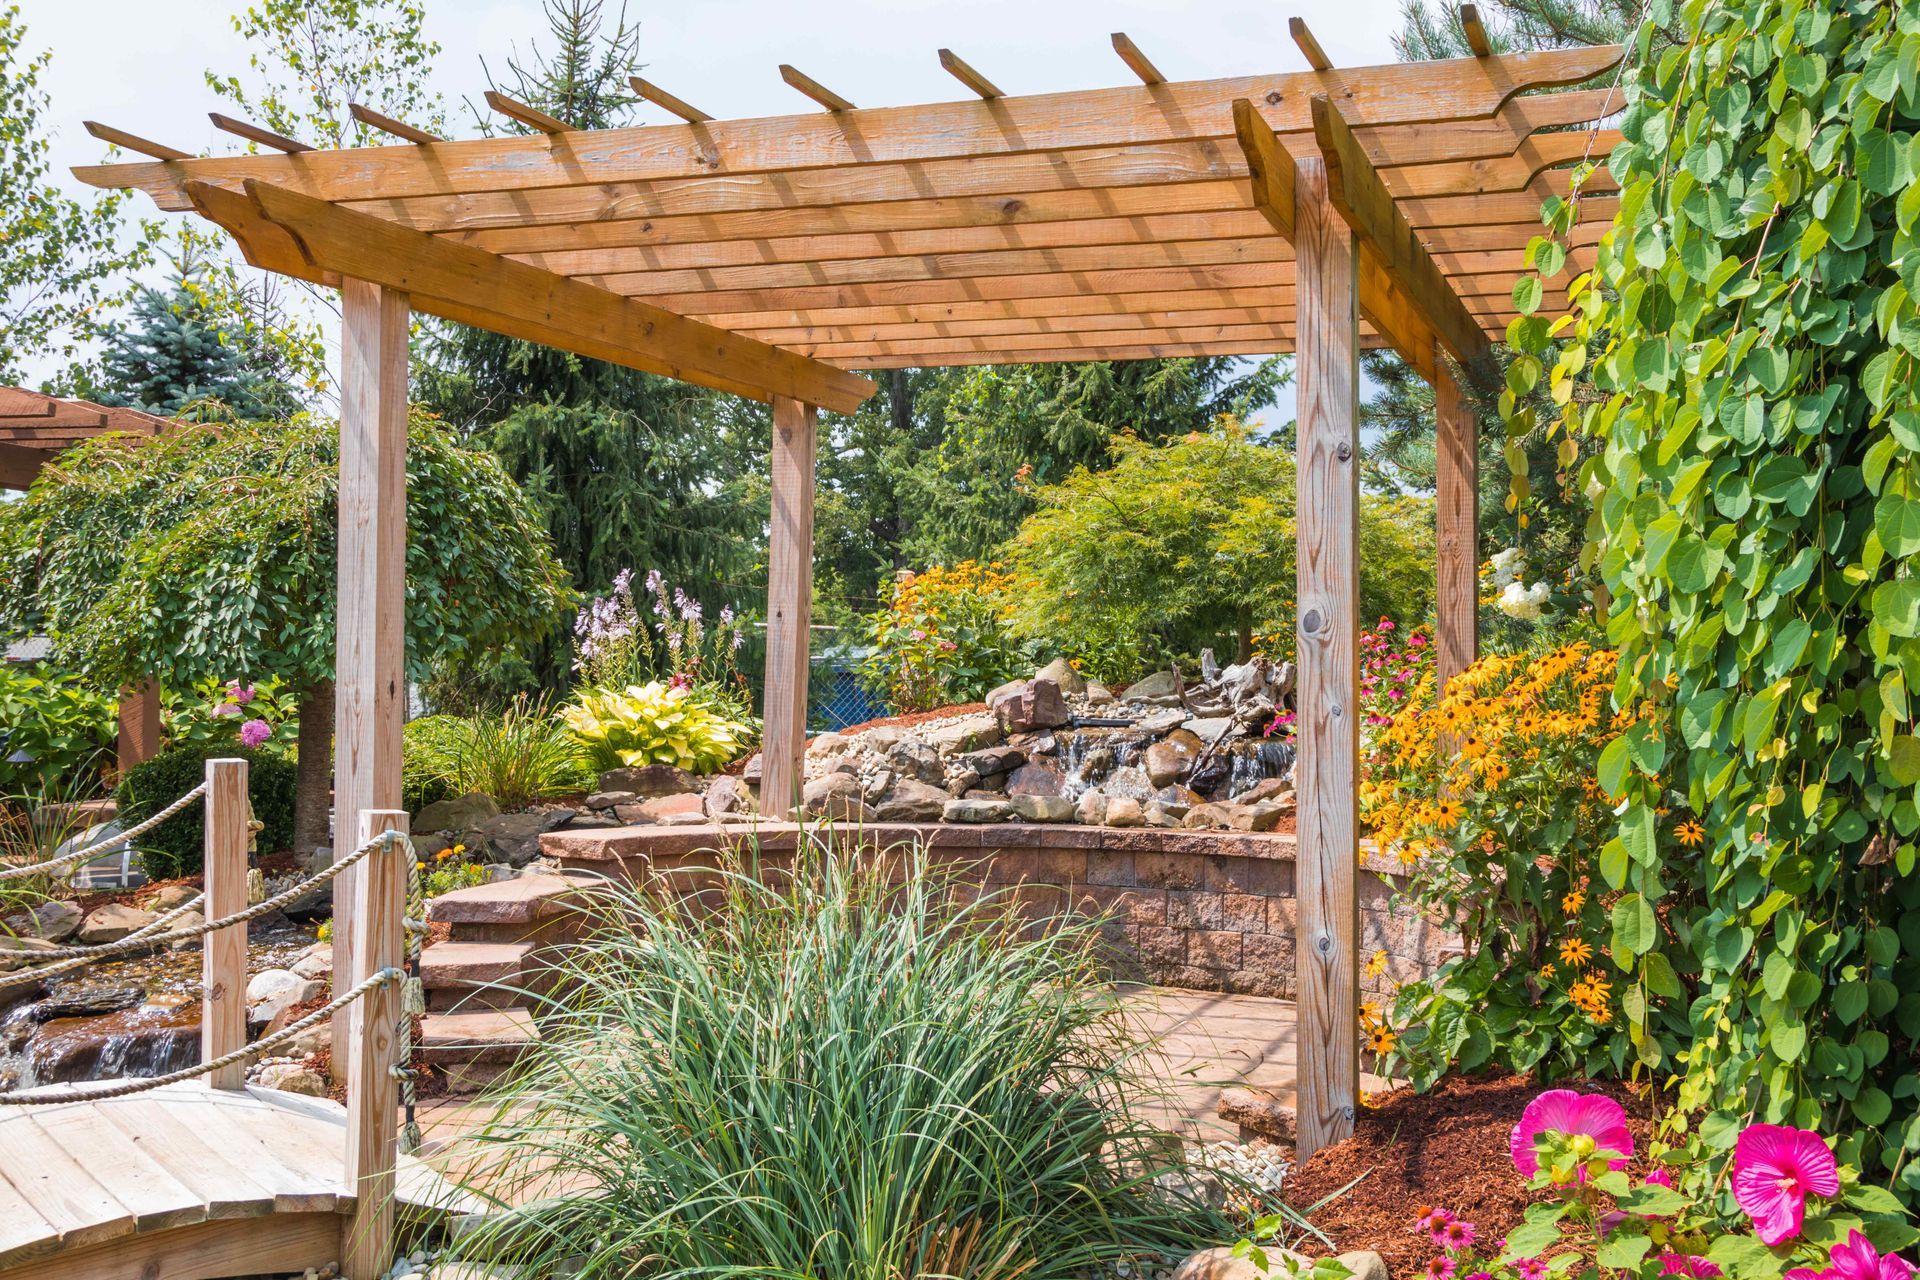 An open-air pergola sits among rocks and hardscape to create a West Coast-inspired backyard landscape.